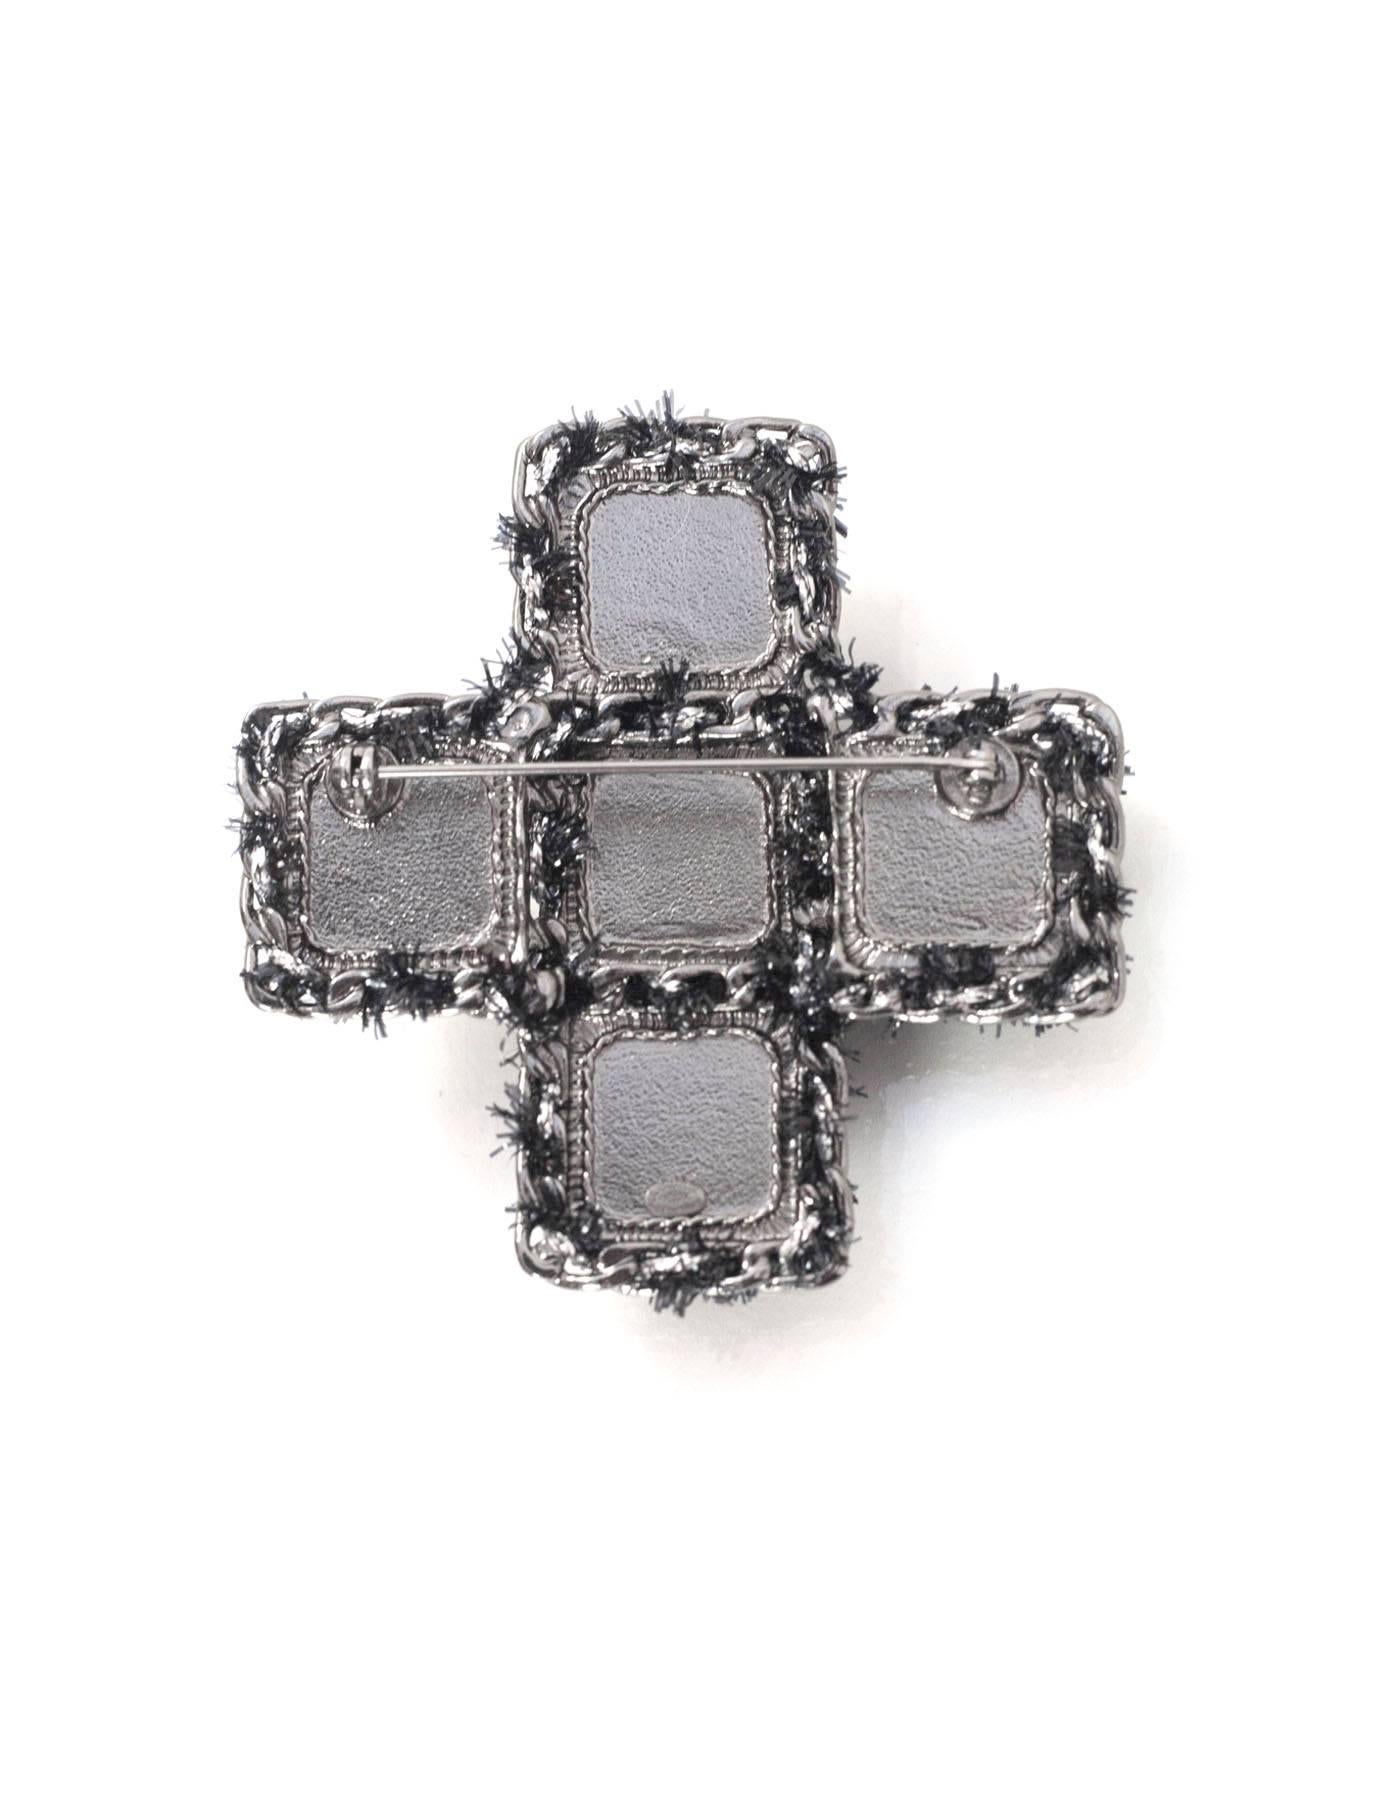 Chanel Black Velvet Cross Brooch Pin 
Features center ruthenium CC

Made In: France
Year of Production: 2013
Color: Black
Hardware: Ruthenium
Materials: Velvet and metal 
Closure: Pin back closure
Stamp: A13 CC K
Overall Condition: Excellent